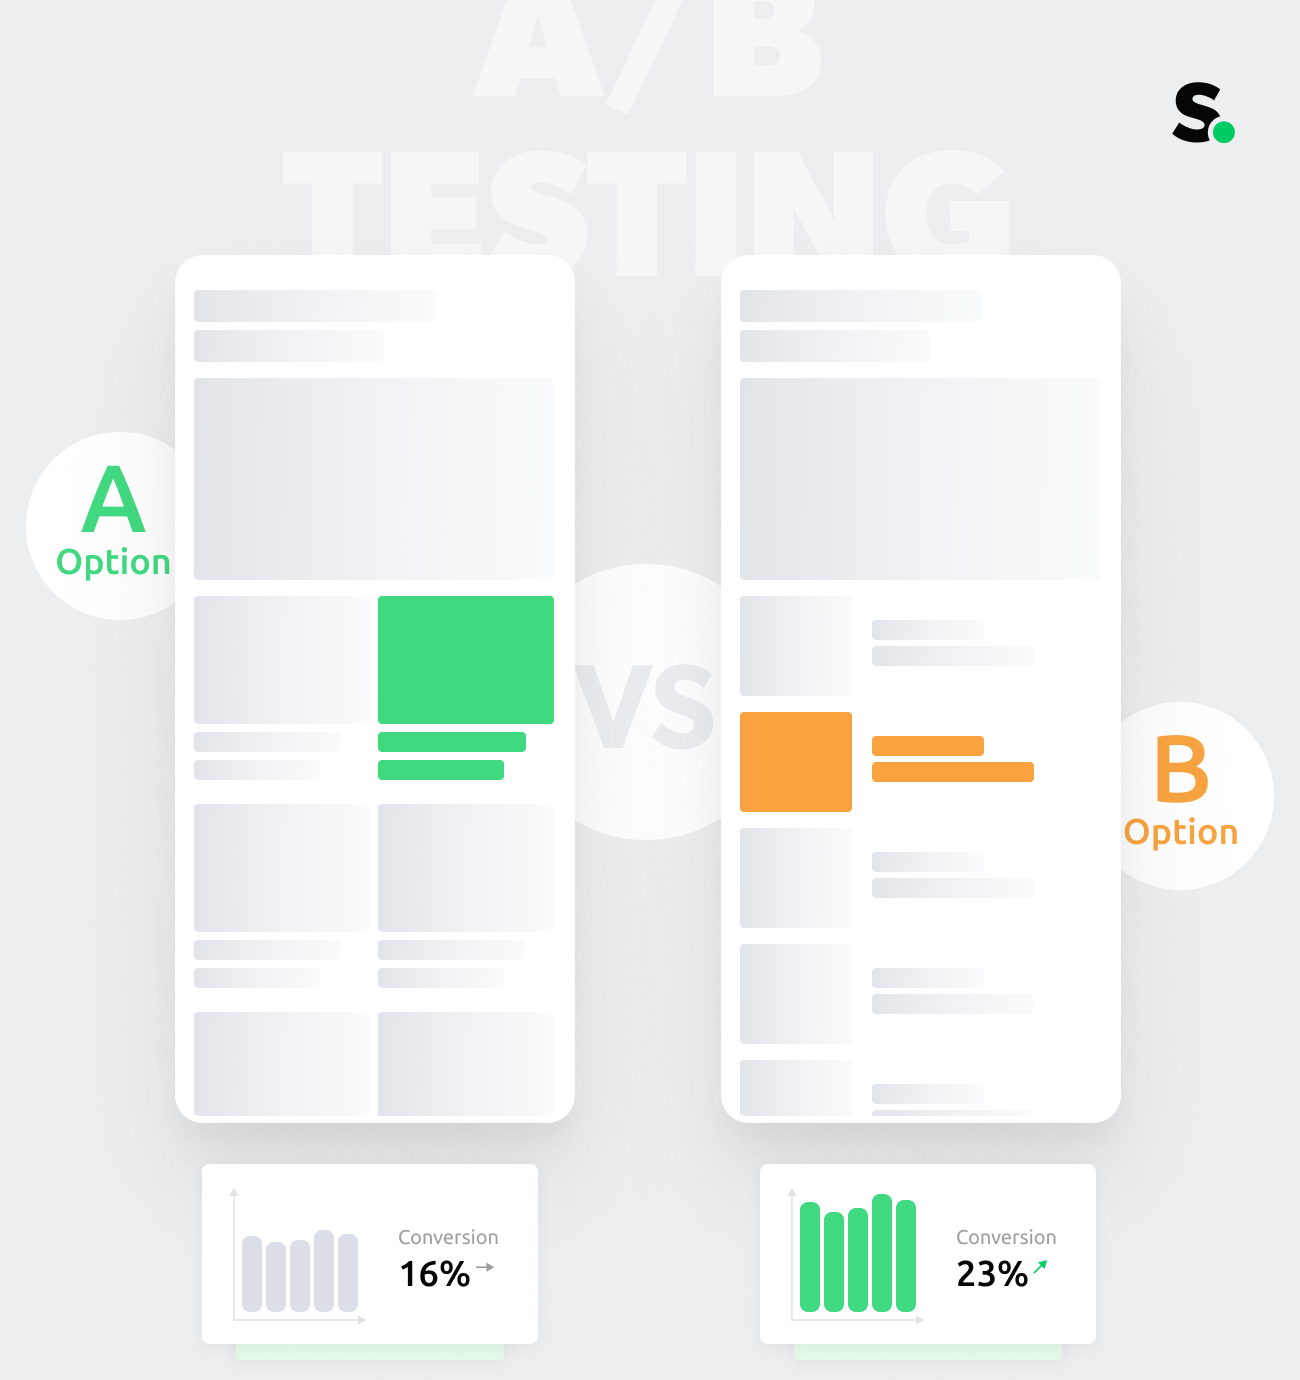 UI deliverable on A/B testing